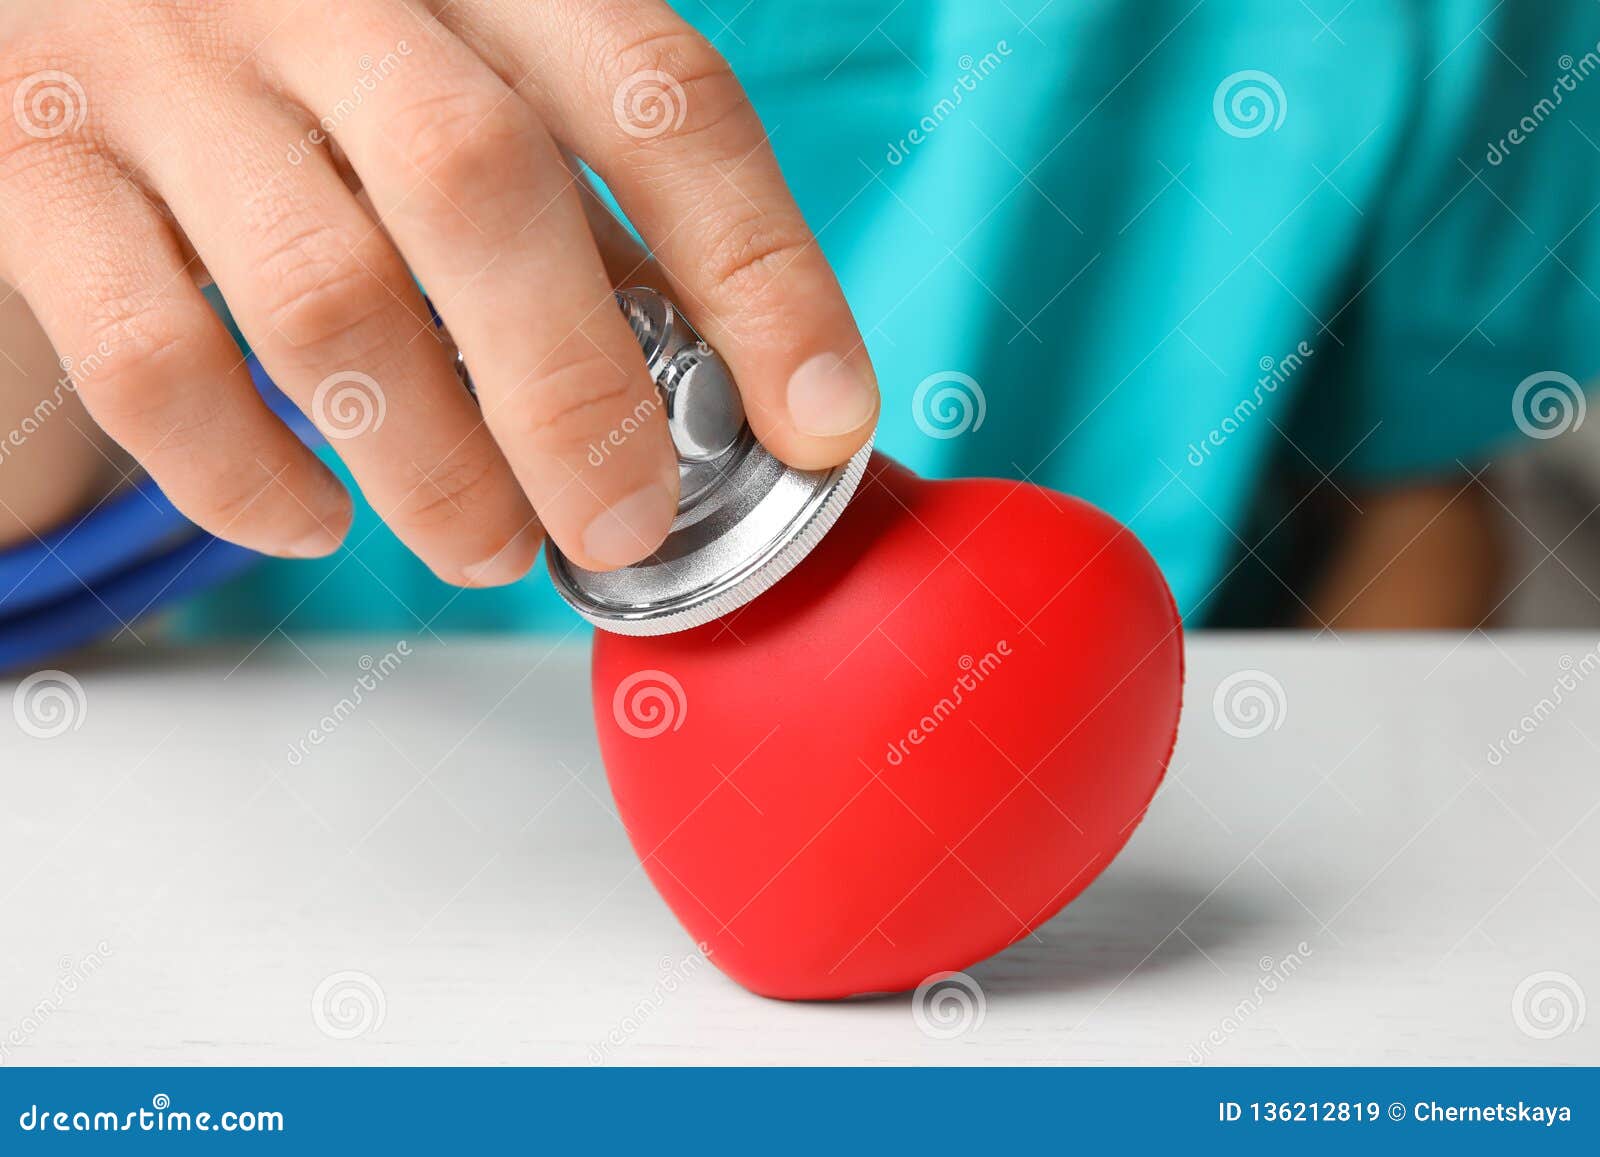 Doctor Holding Stethoscope Near Red Heart On Wooden Table, Closeup. Stock Image - Image of ...